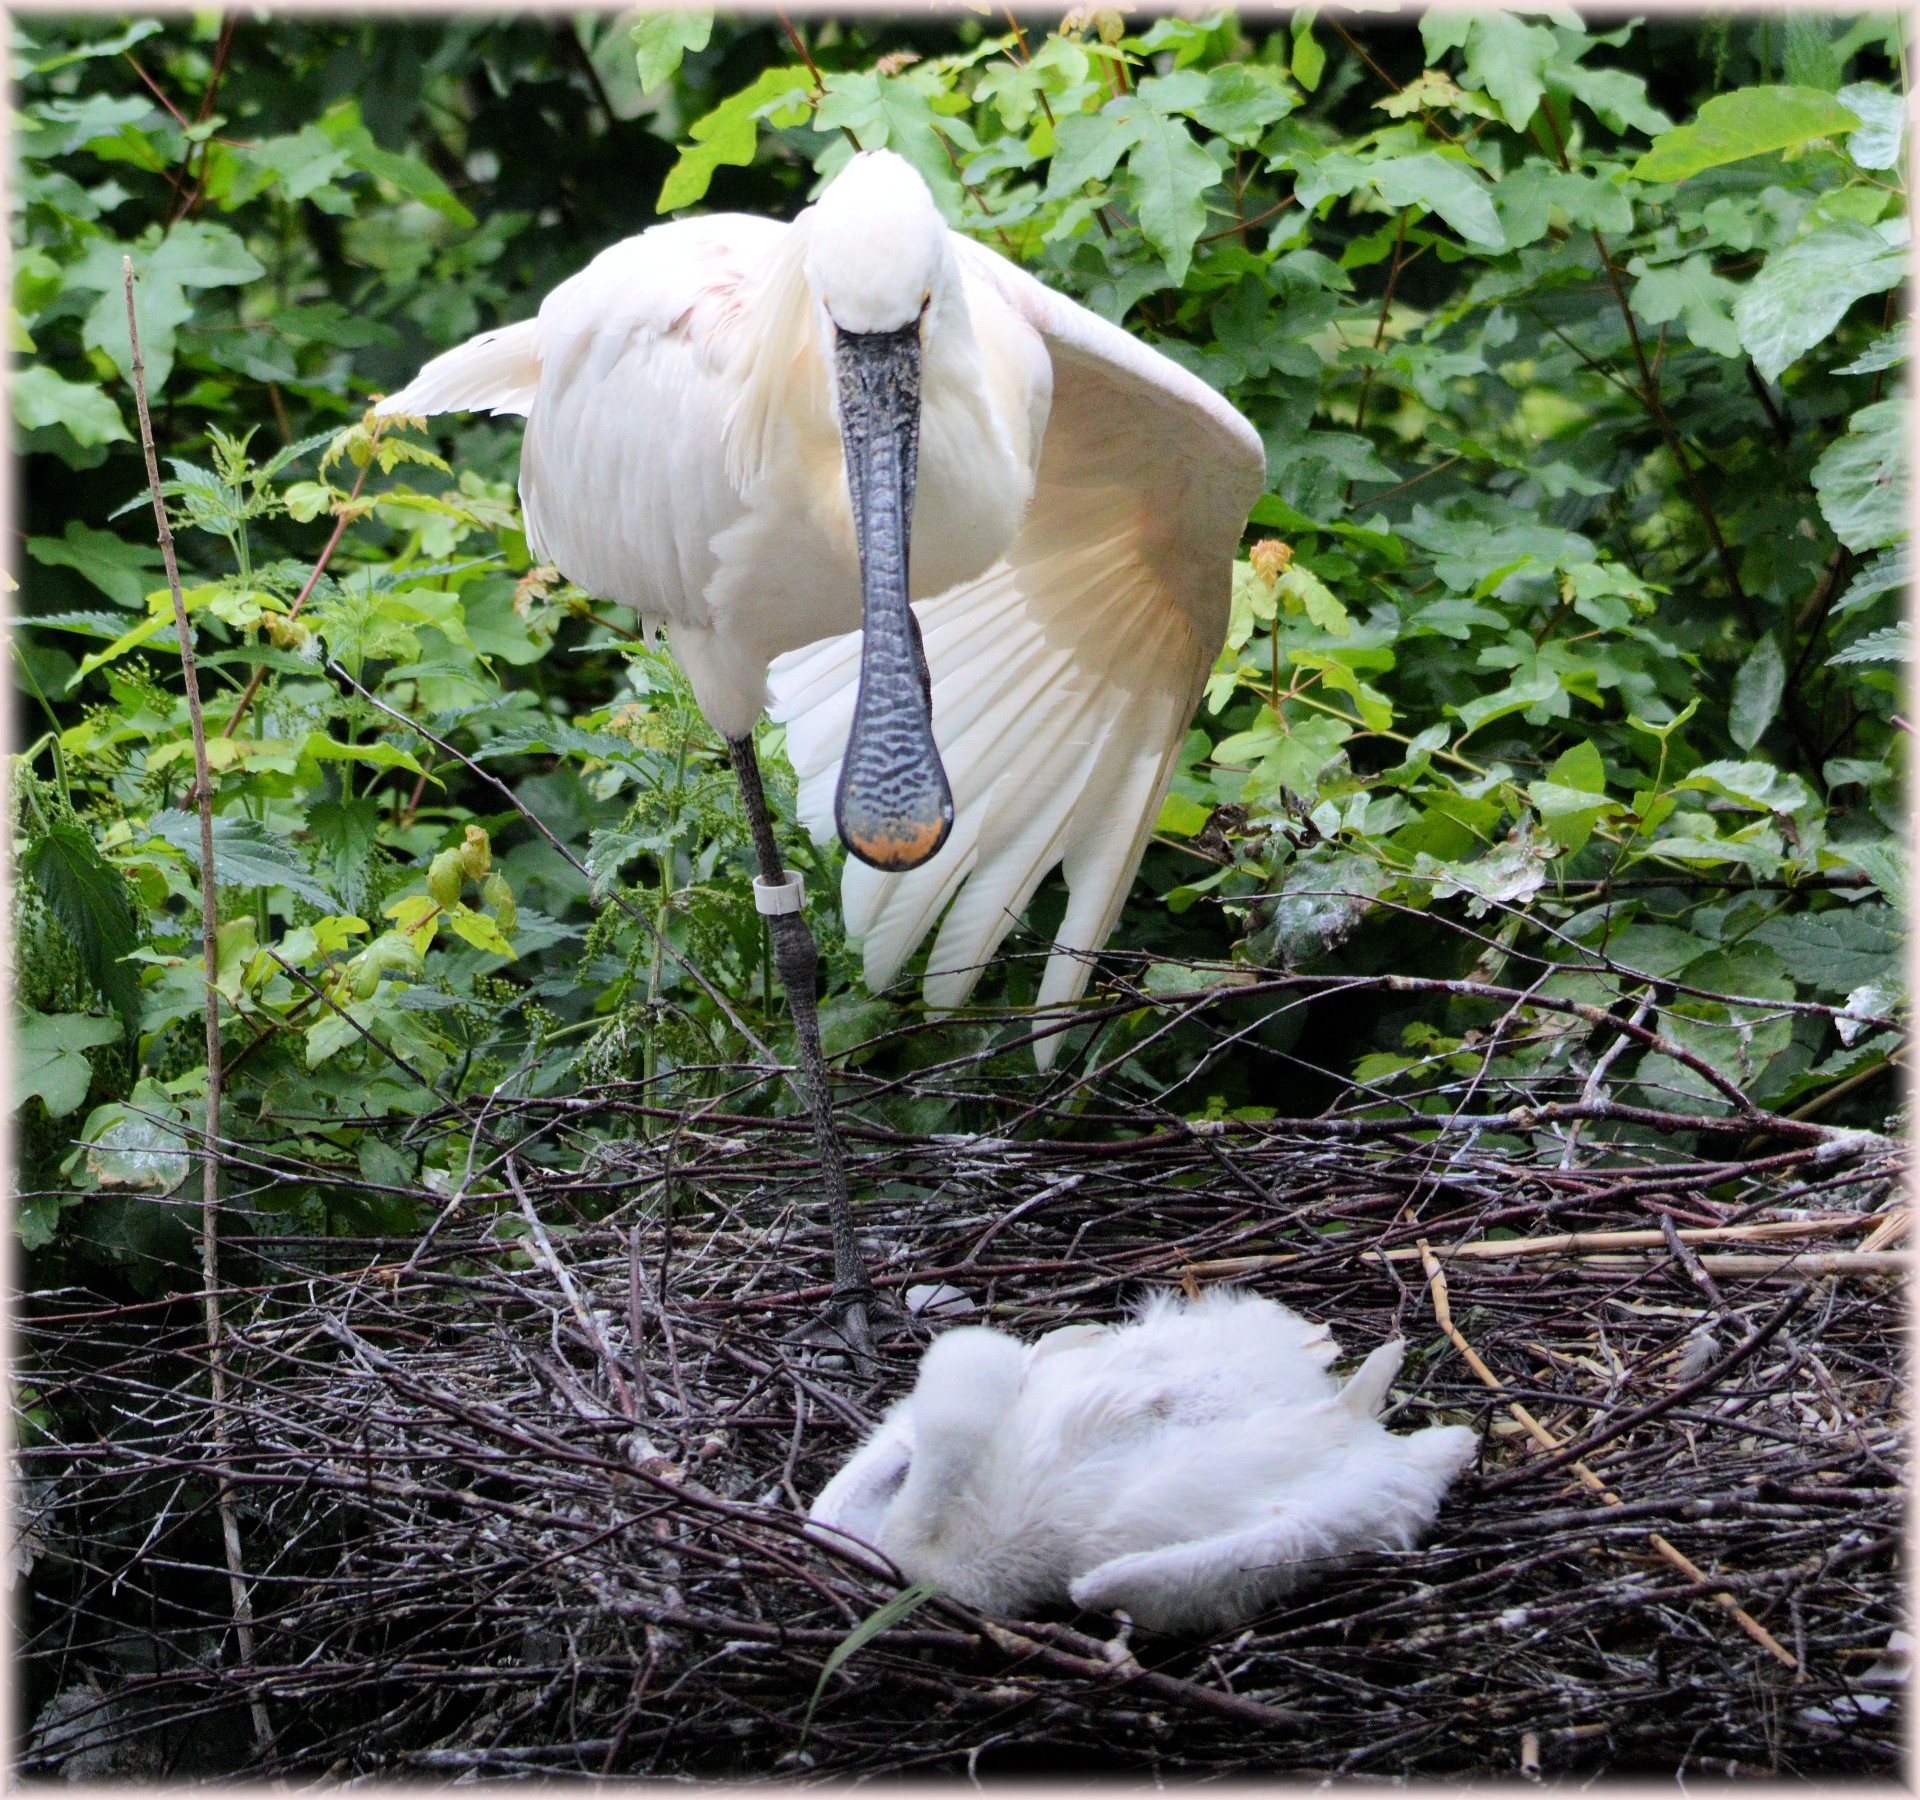 spoonbill young nature free photo